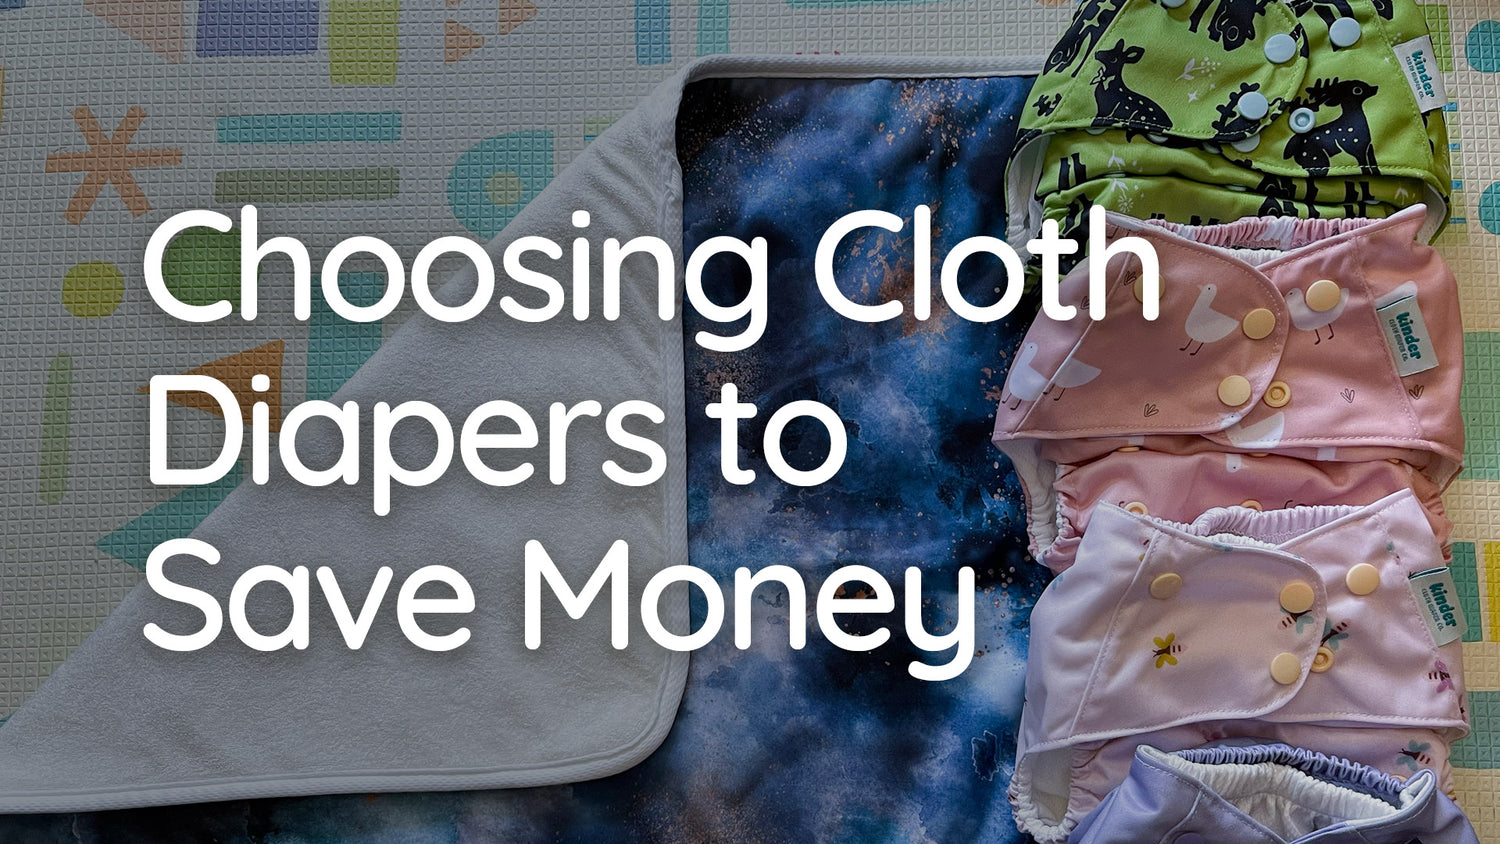 Cloth Diaper Mom, Carissa, Shares How Switching to Cloth Diapers Saved Her Family Money